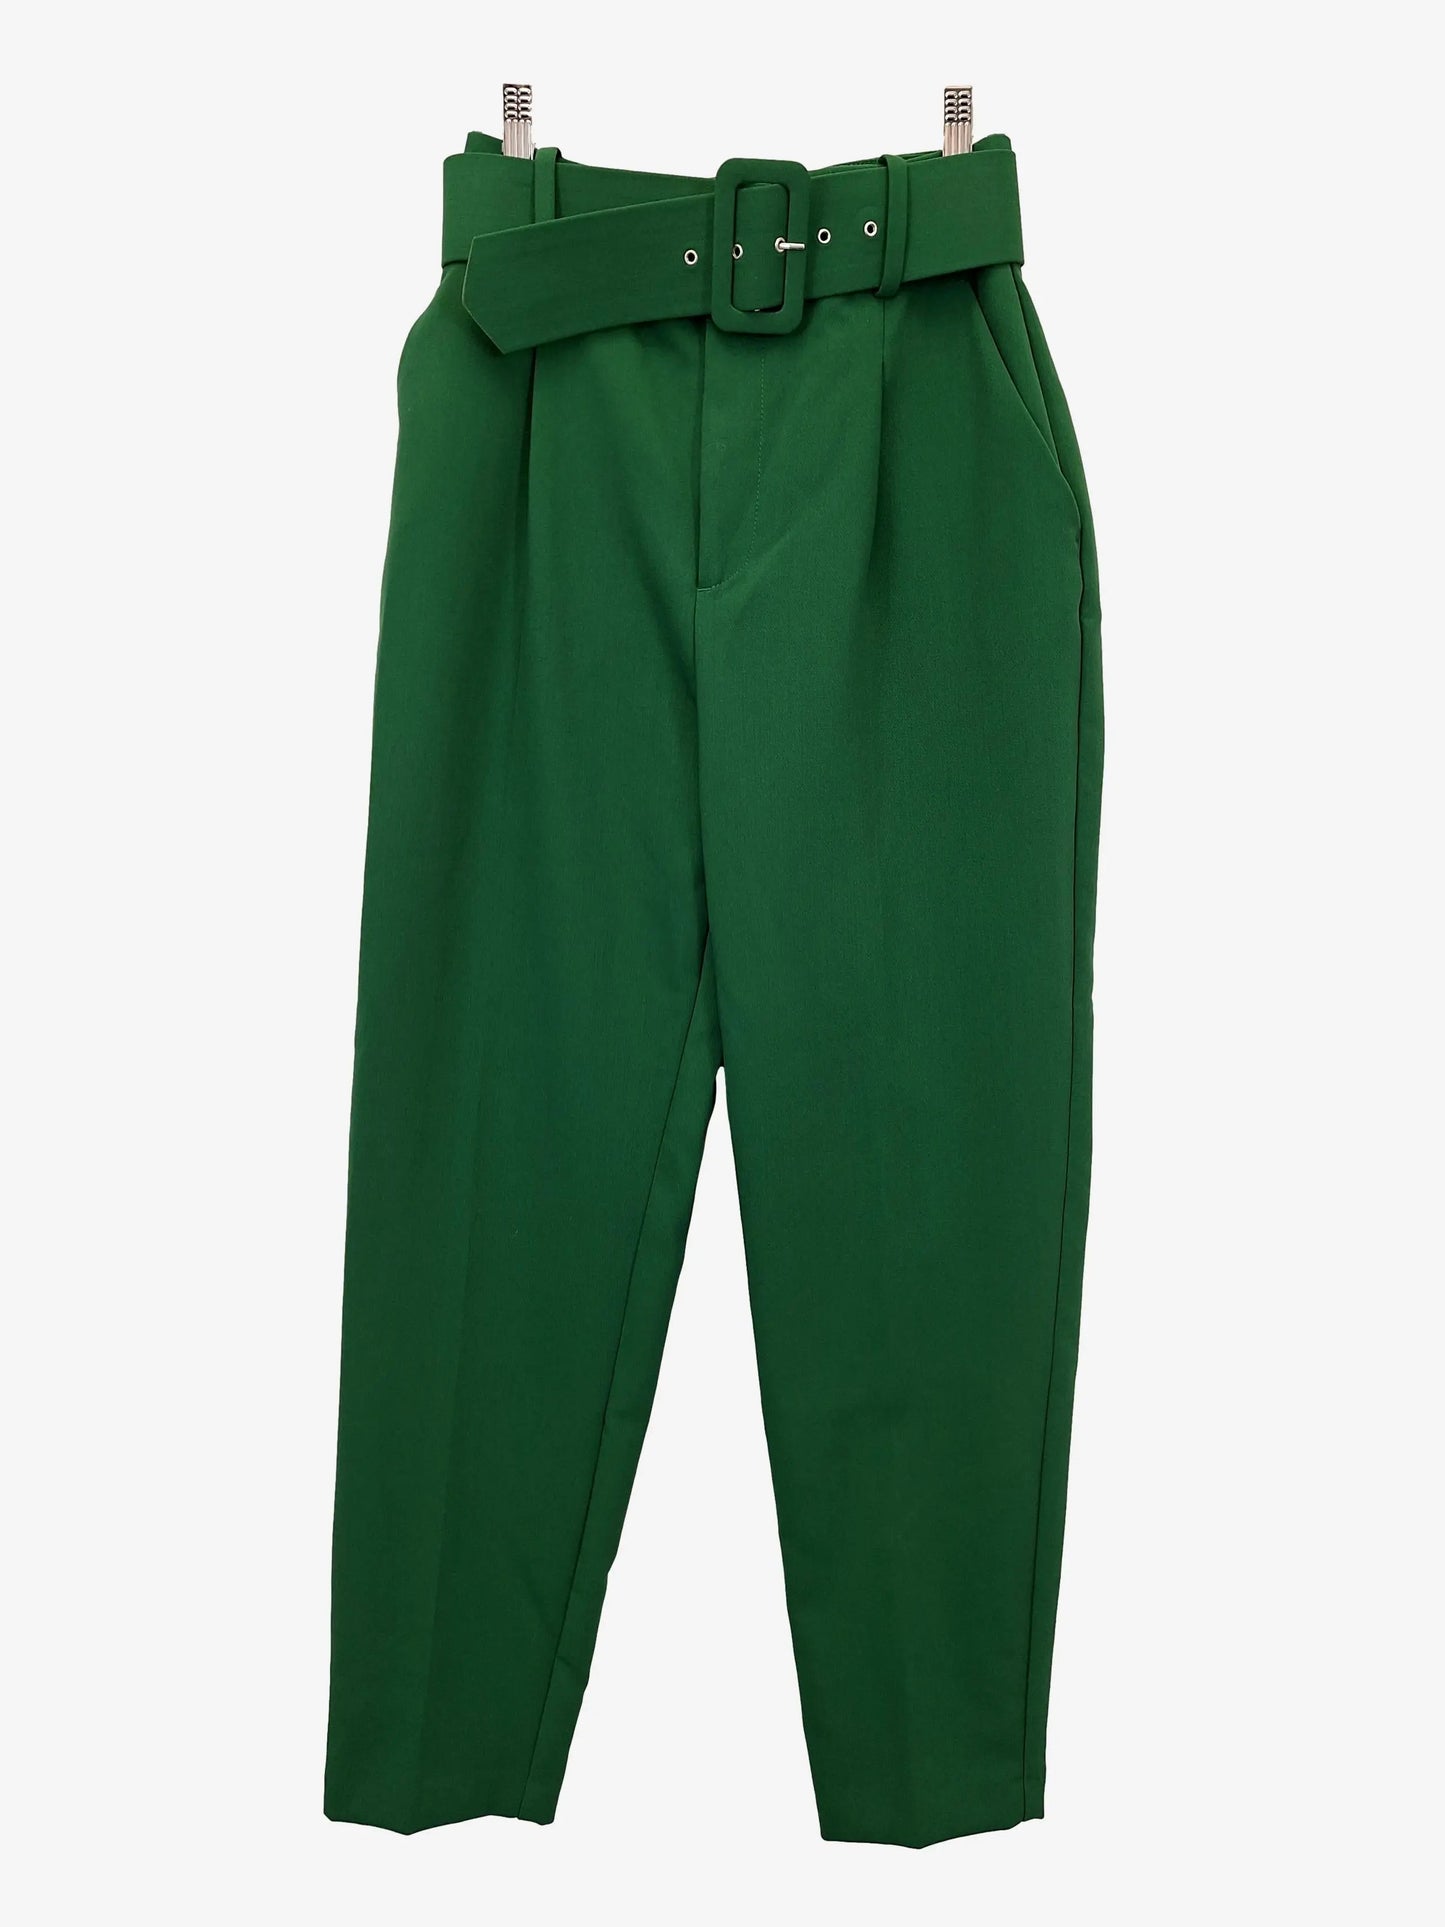 Zara high waisted belted pants  Belted pants, High waisted, Pants